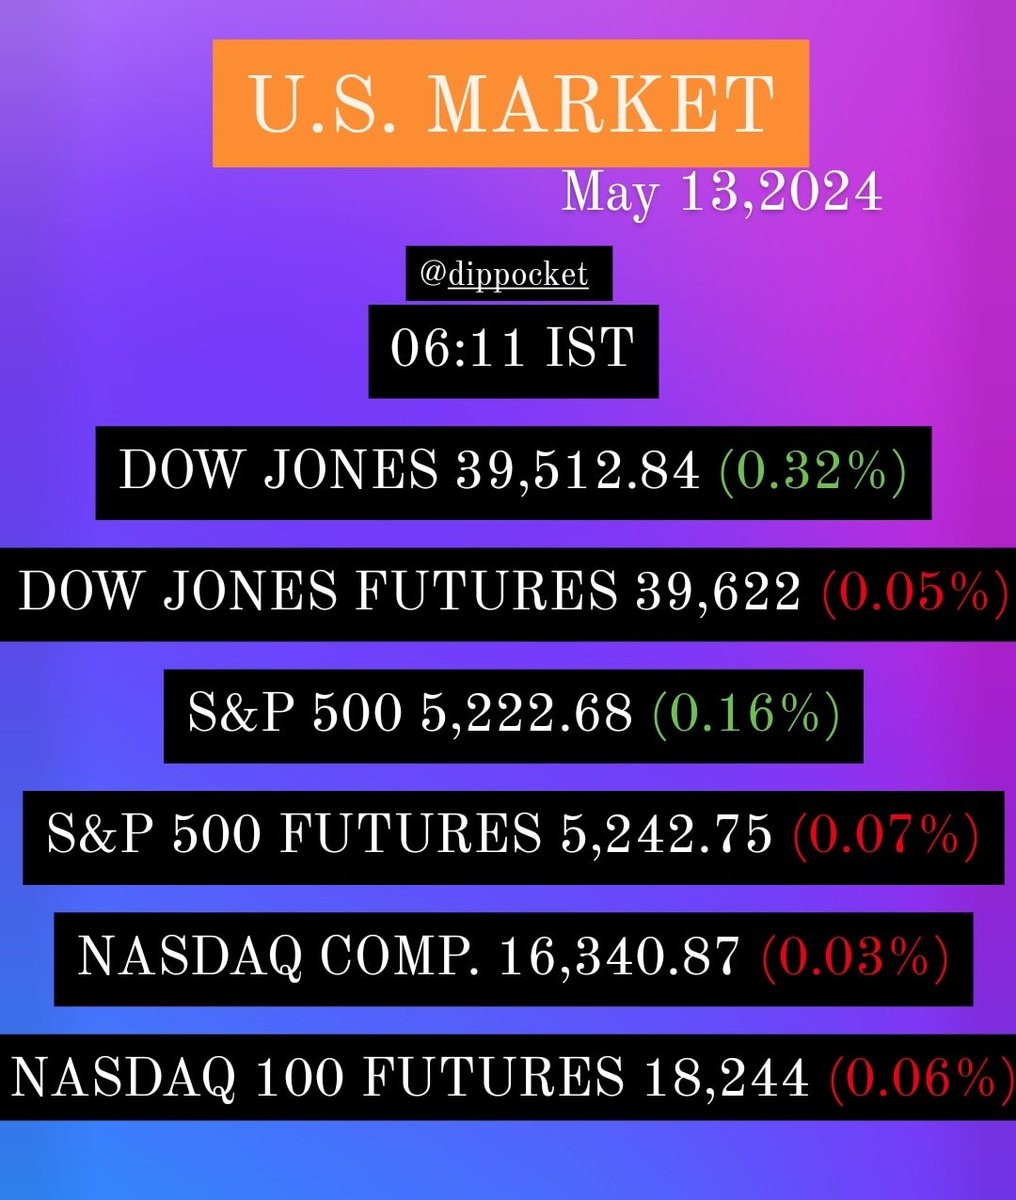 Here's how U.S. futures are faring ahead of Indian market open..#usmarkets #dowjones #dowjonesfutures #sp500 #sp500futures #nasdaqcomp #nasdaq100futures #investing #investment #investors #StockMarkets